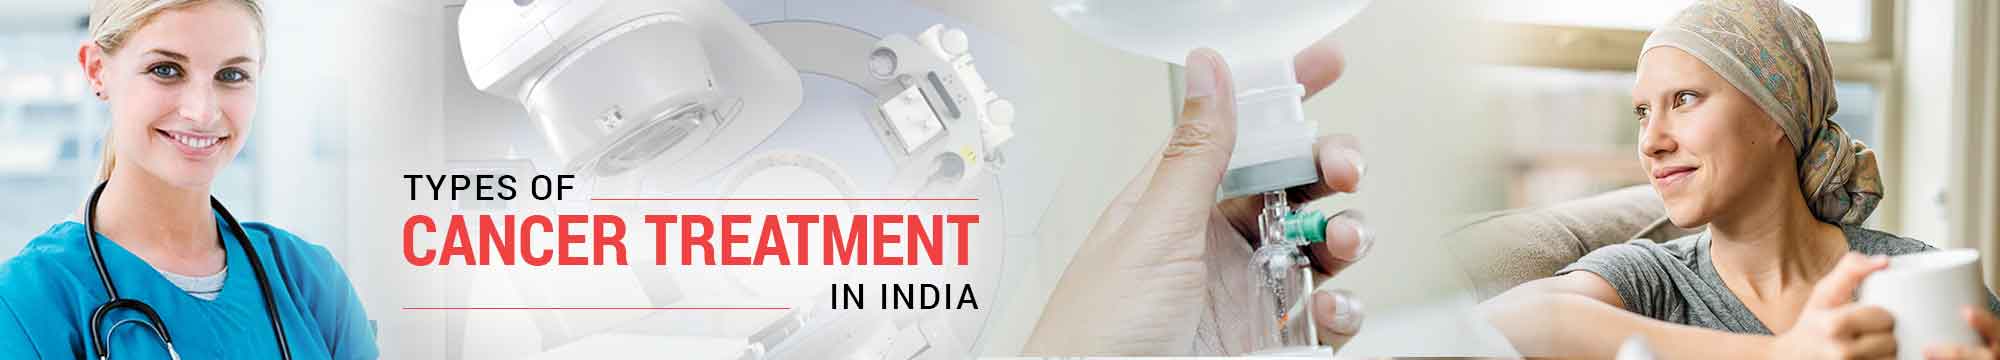 Cancer Treatment in India | Cancer Surgery Types in India